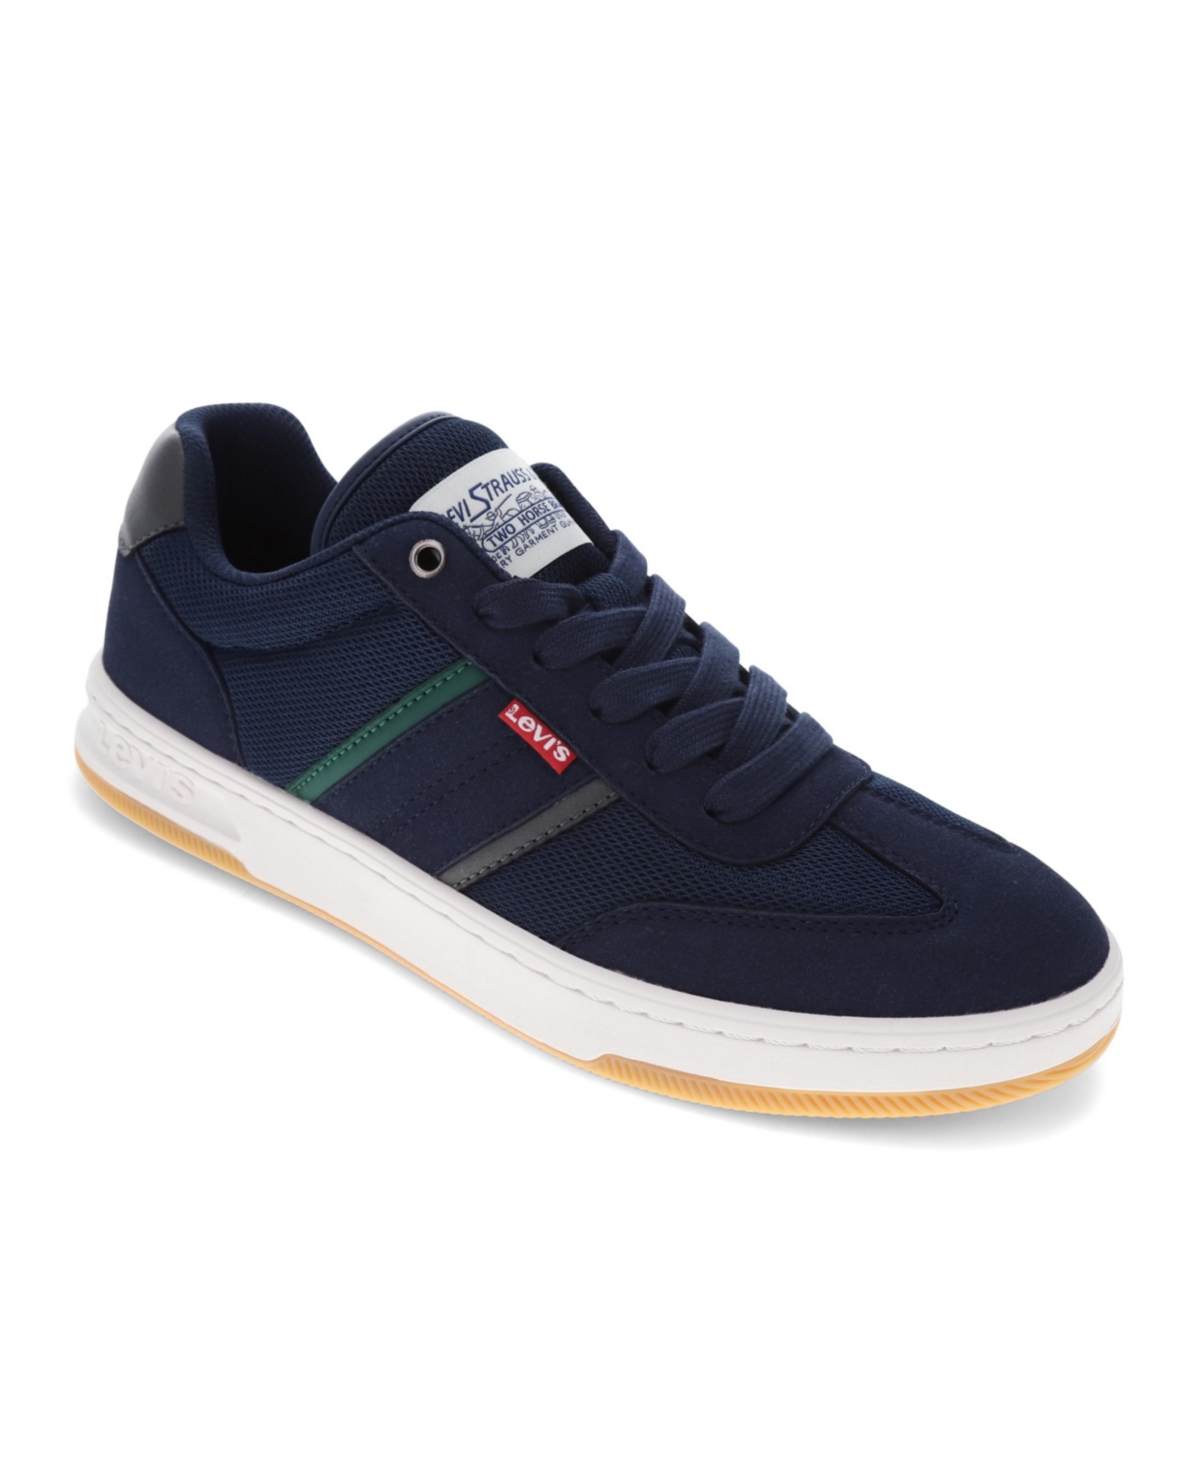 Men's Zane Low-Top Athletic Lace Up Sneakers - Navy, Grey